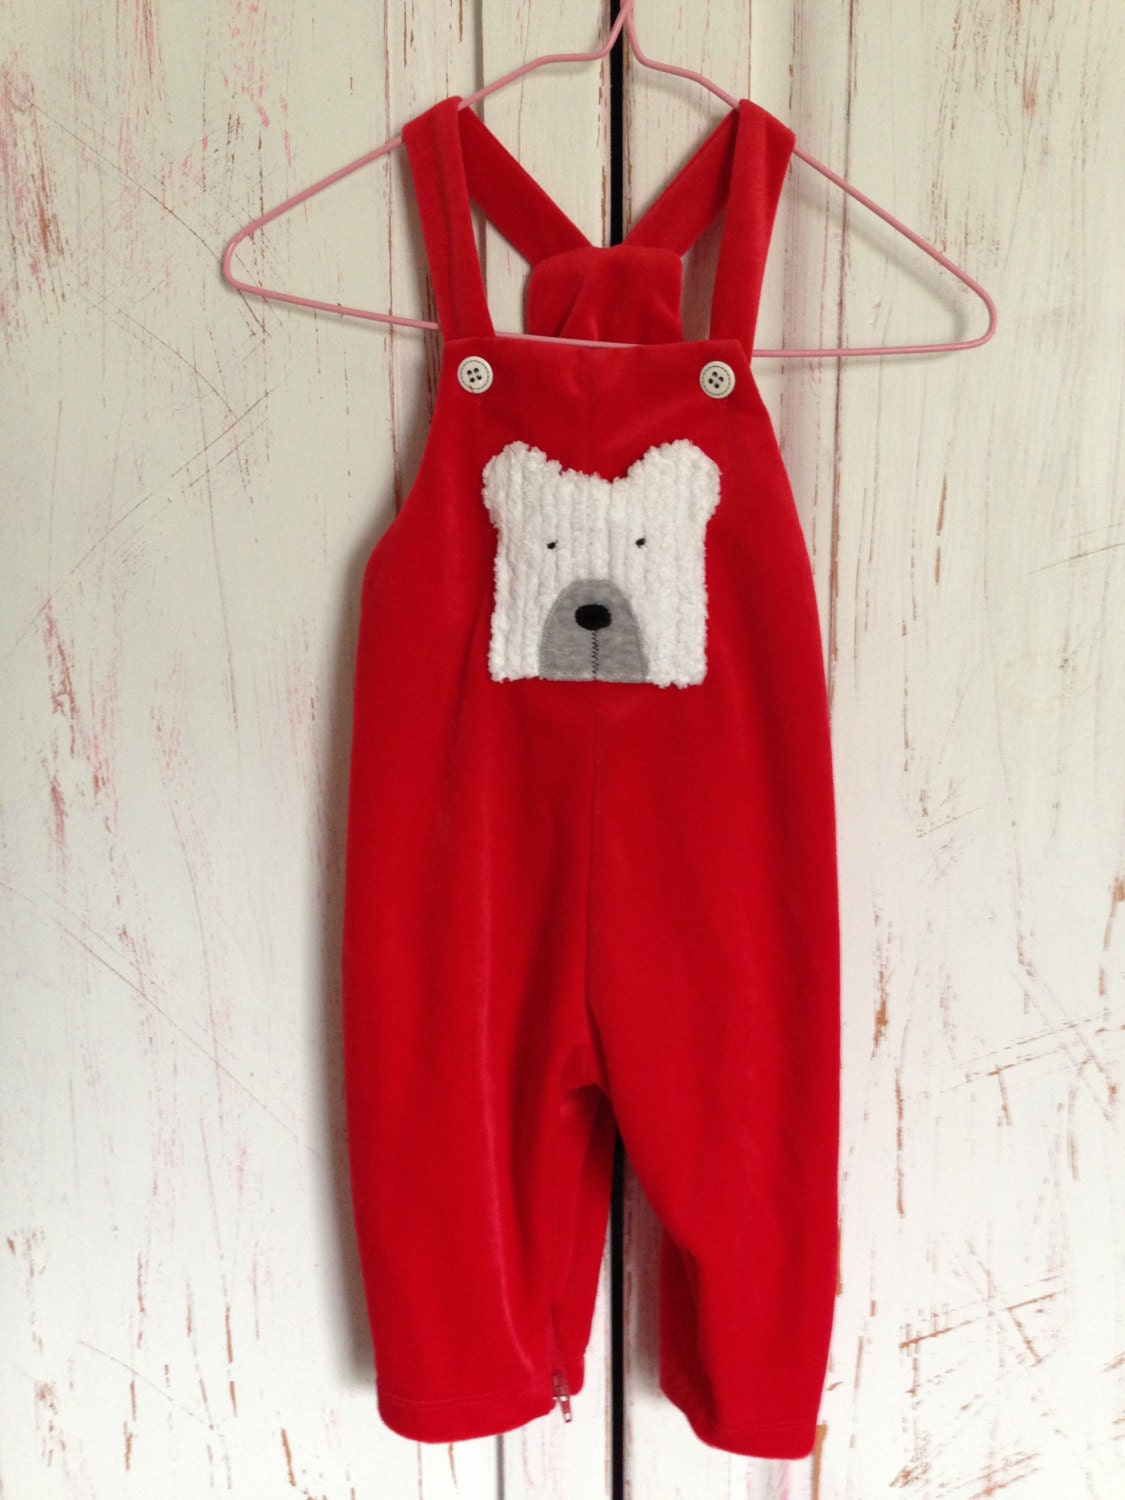 Vintage Red Velour Baby Overall By Sweet Potatoes 12 months - BlueLittleBirds